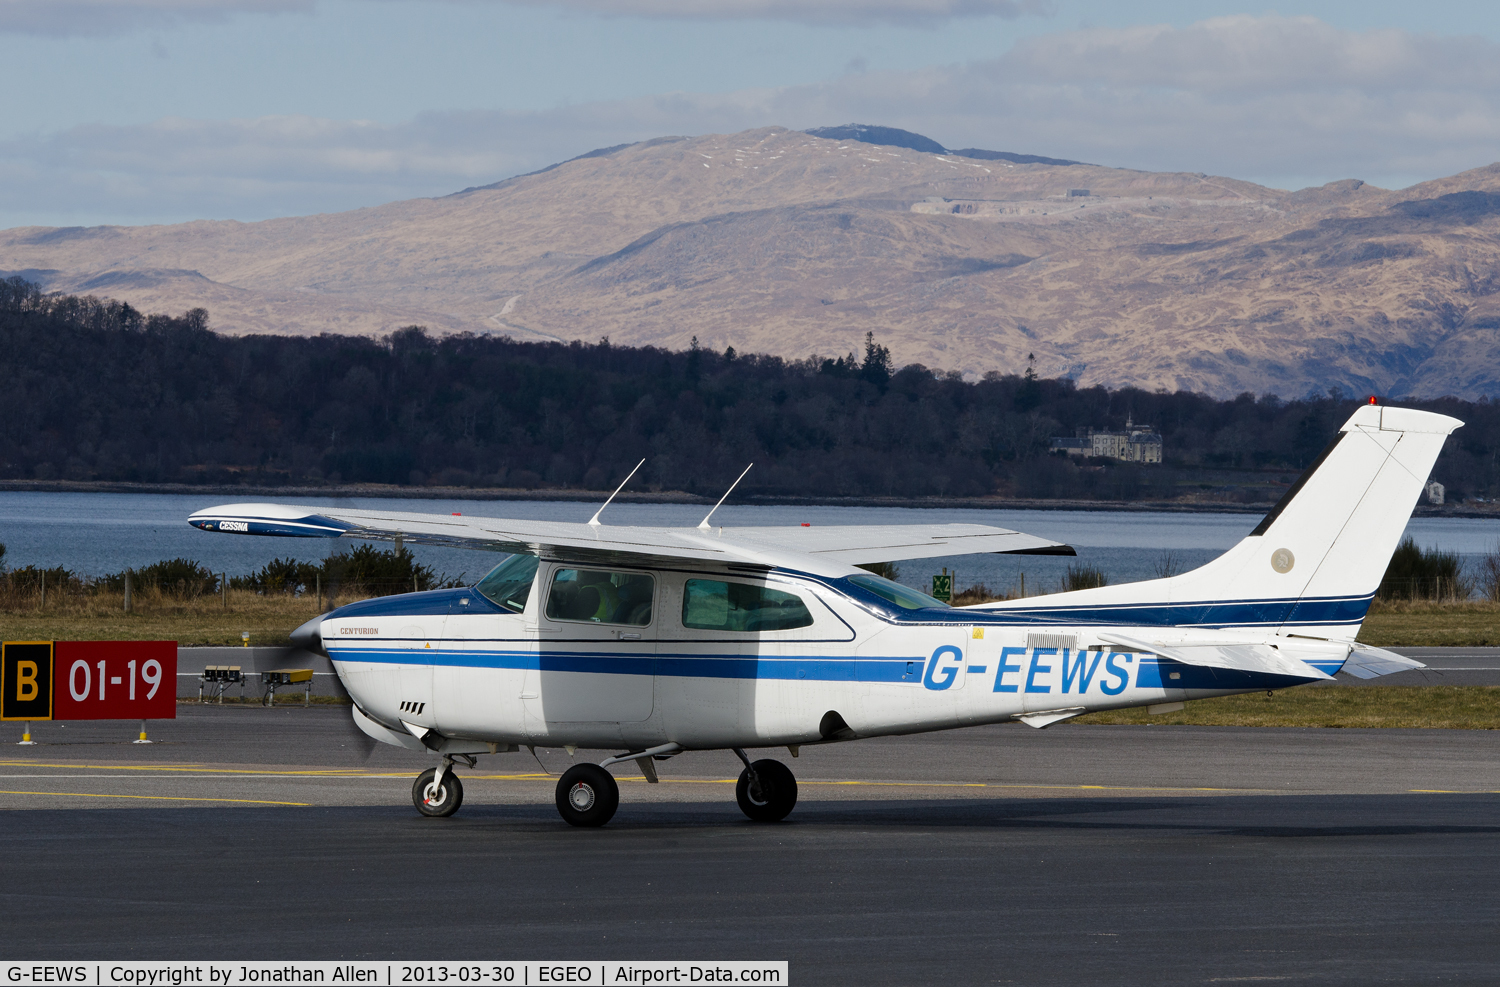 G-EEWS, 1981 Cessna T210N Turbo Centurion C/N 210-64341, About to depart from Oban airport.